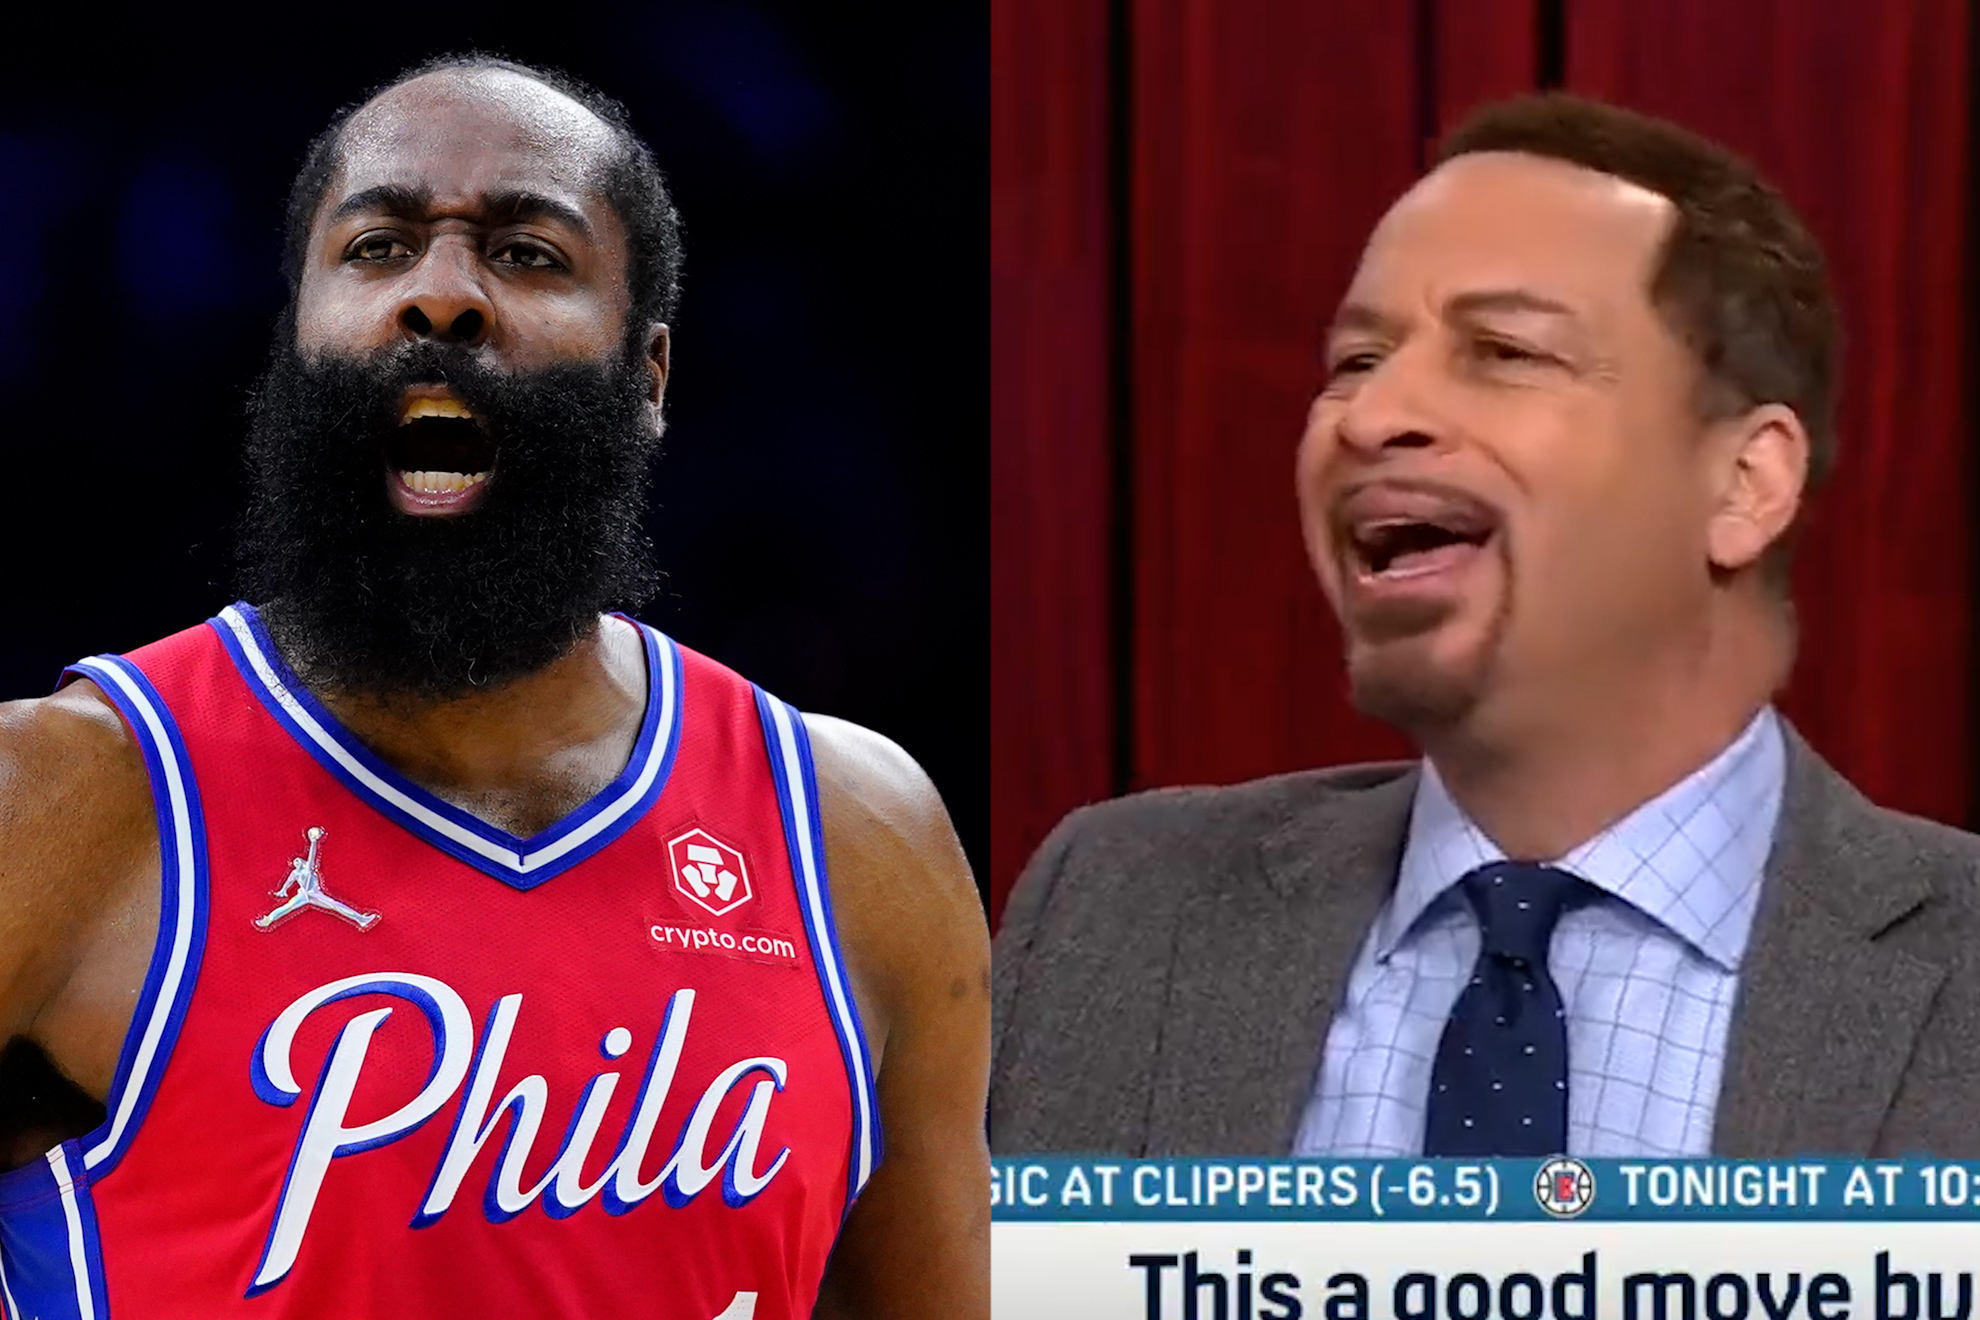 Chris Broussard insults James Harden in heated argument and immediately apologizes